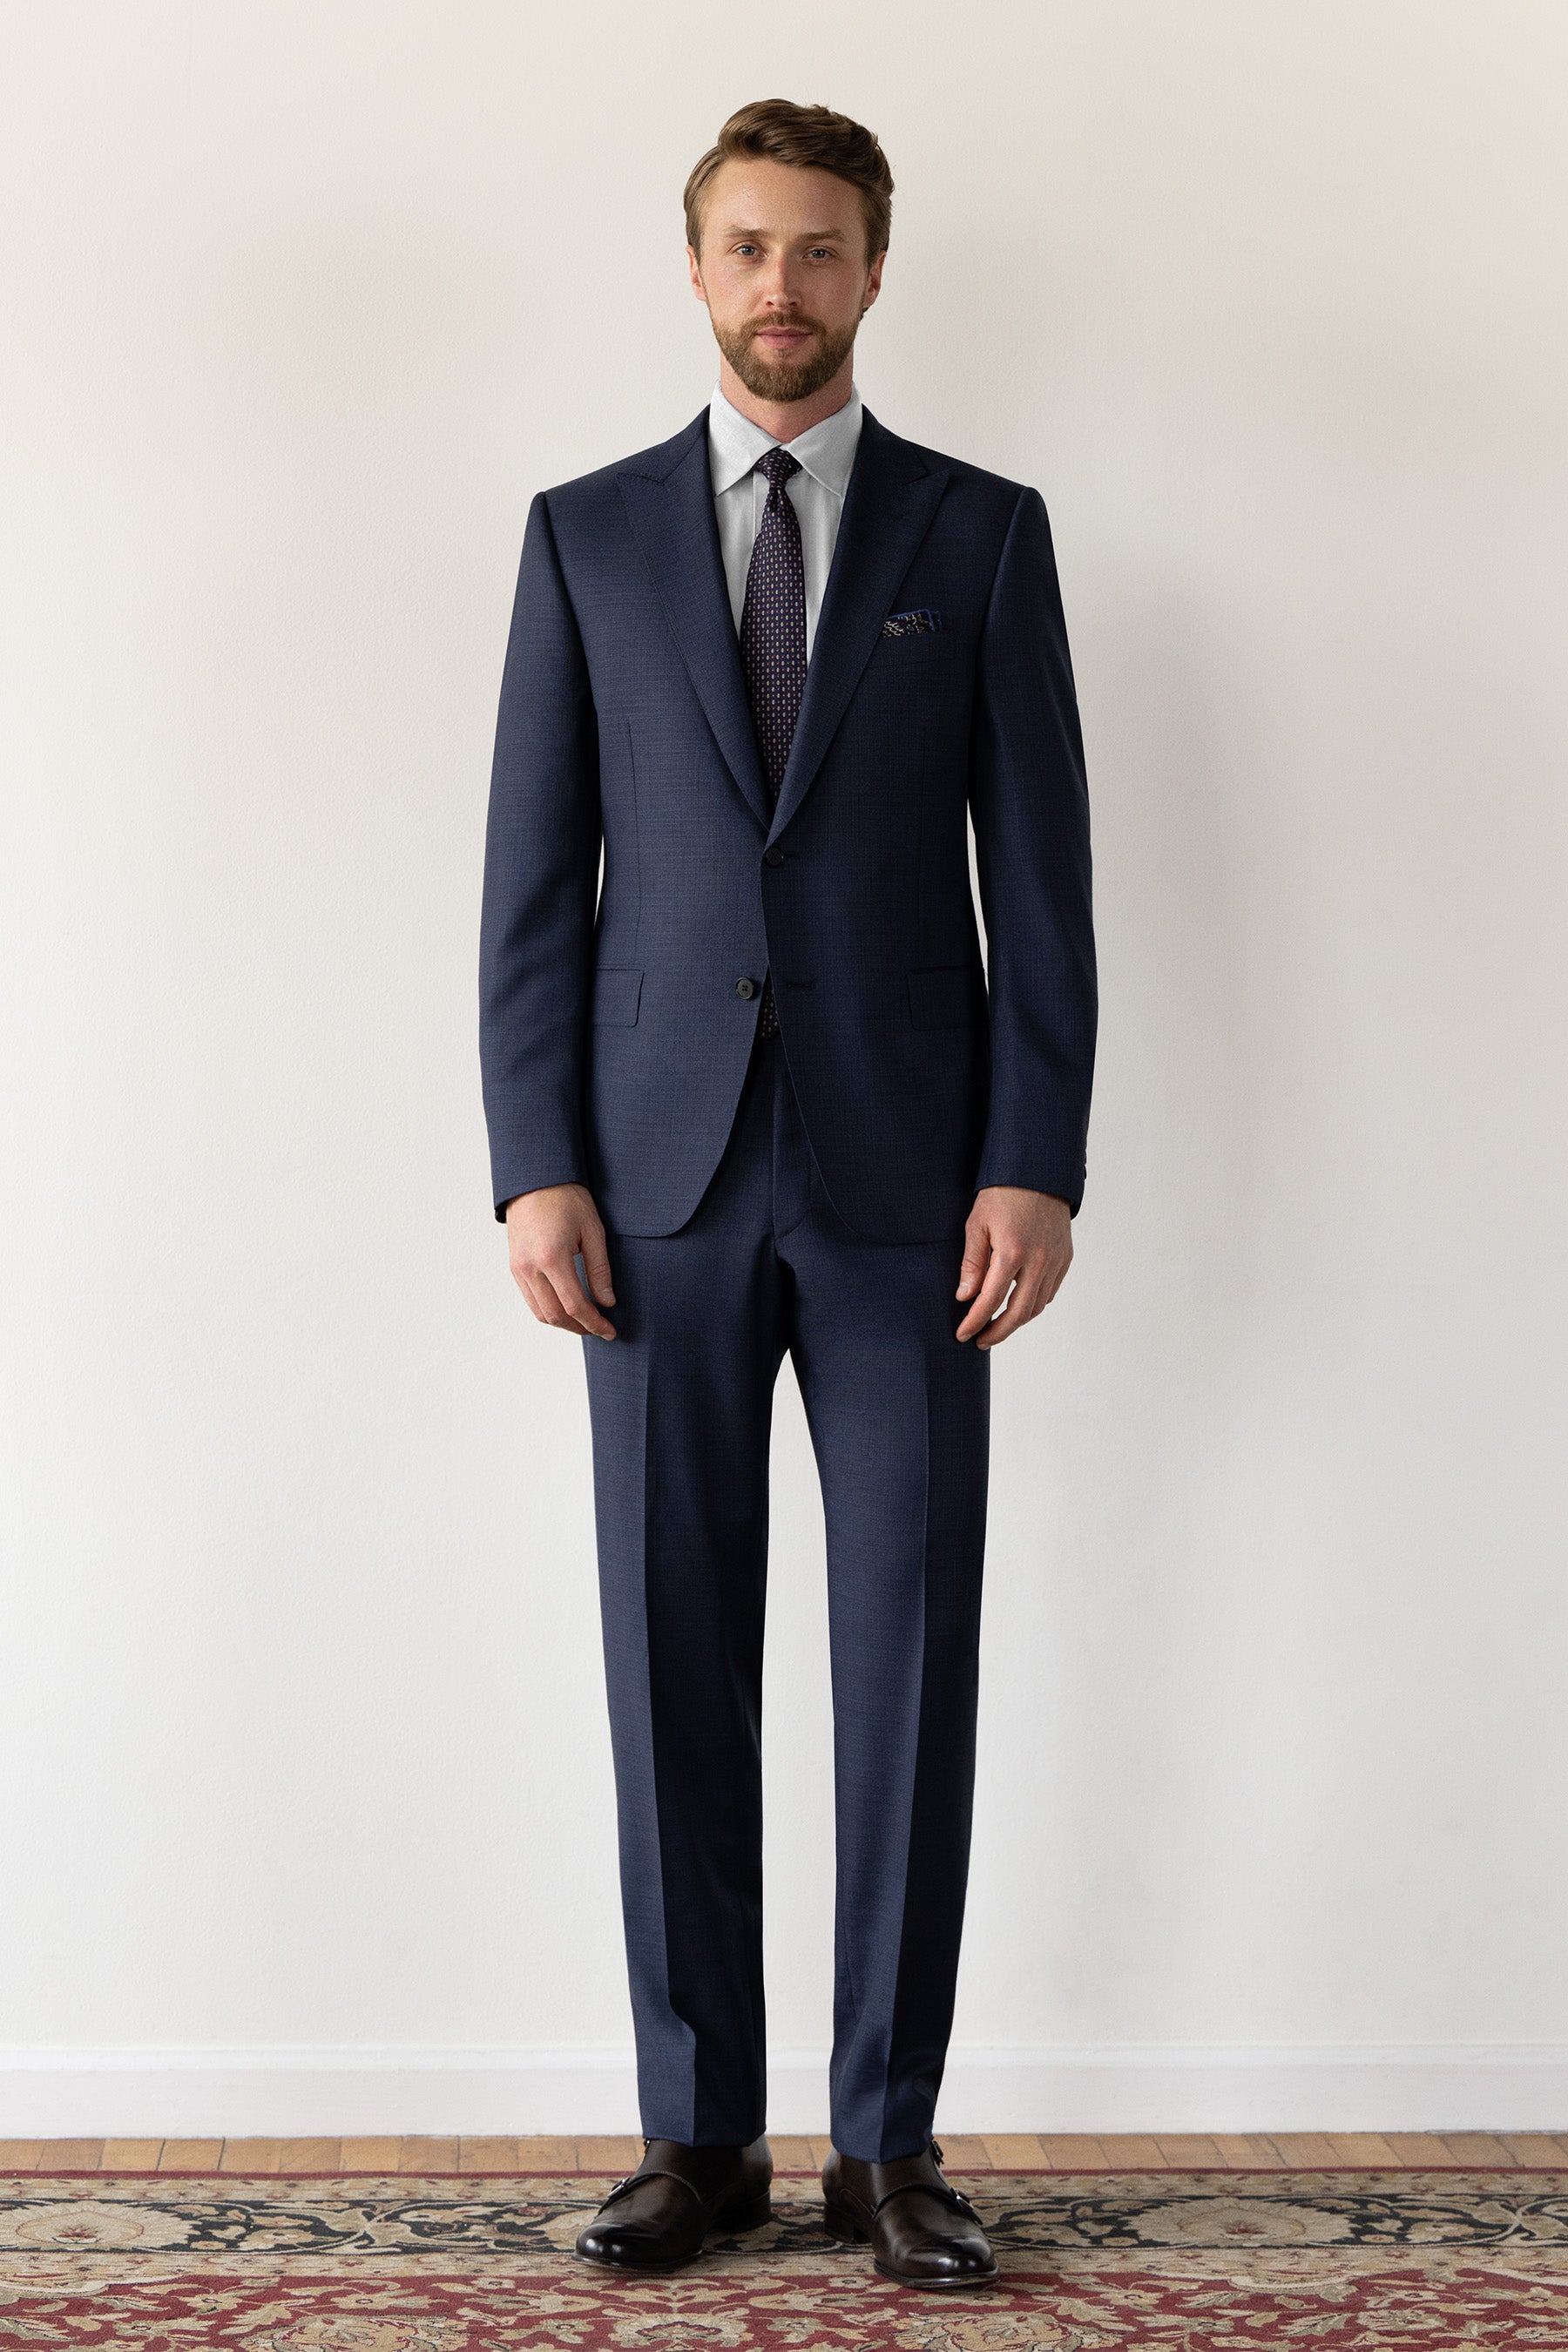 10 Suit Colors & How to Choose One For Men | IsuiT